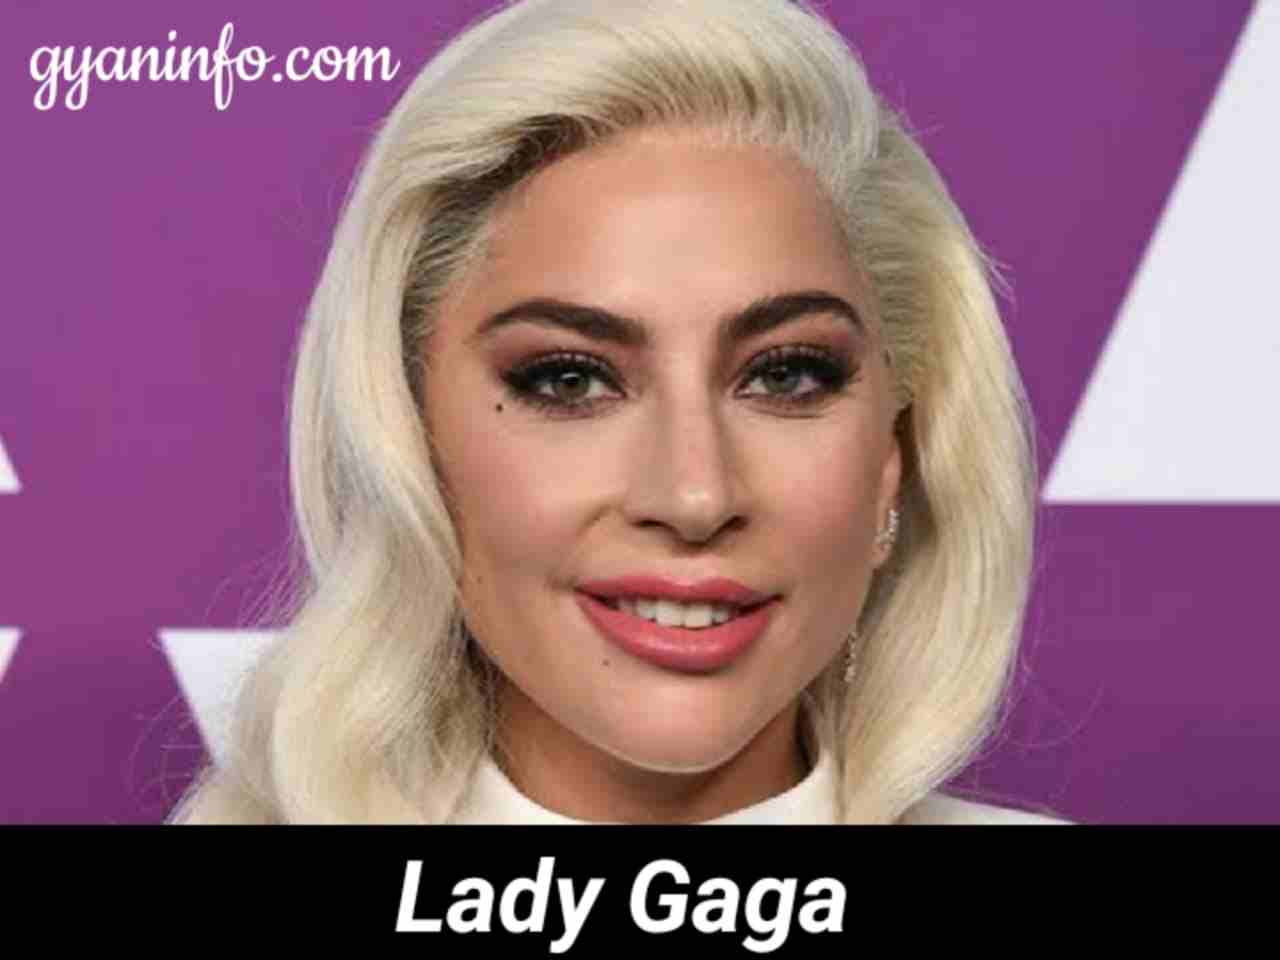 Lady Gaga (American singer-songwriter) Biography, Height, Age, Weight, Body Measurements, Family, Boyfriend, Wiki, Net Worth & More